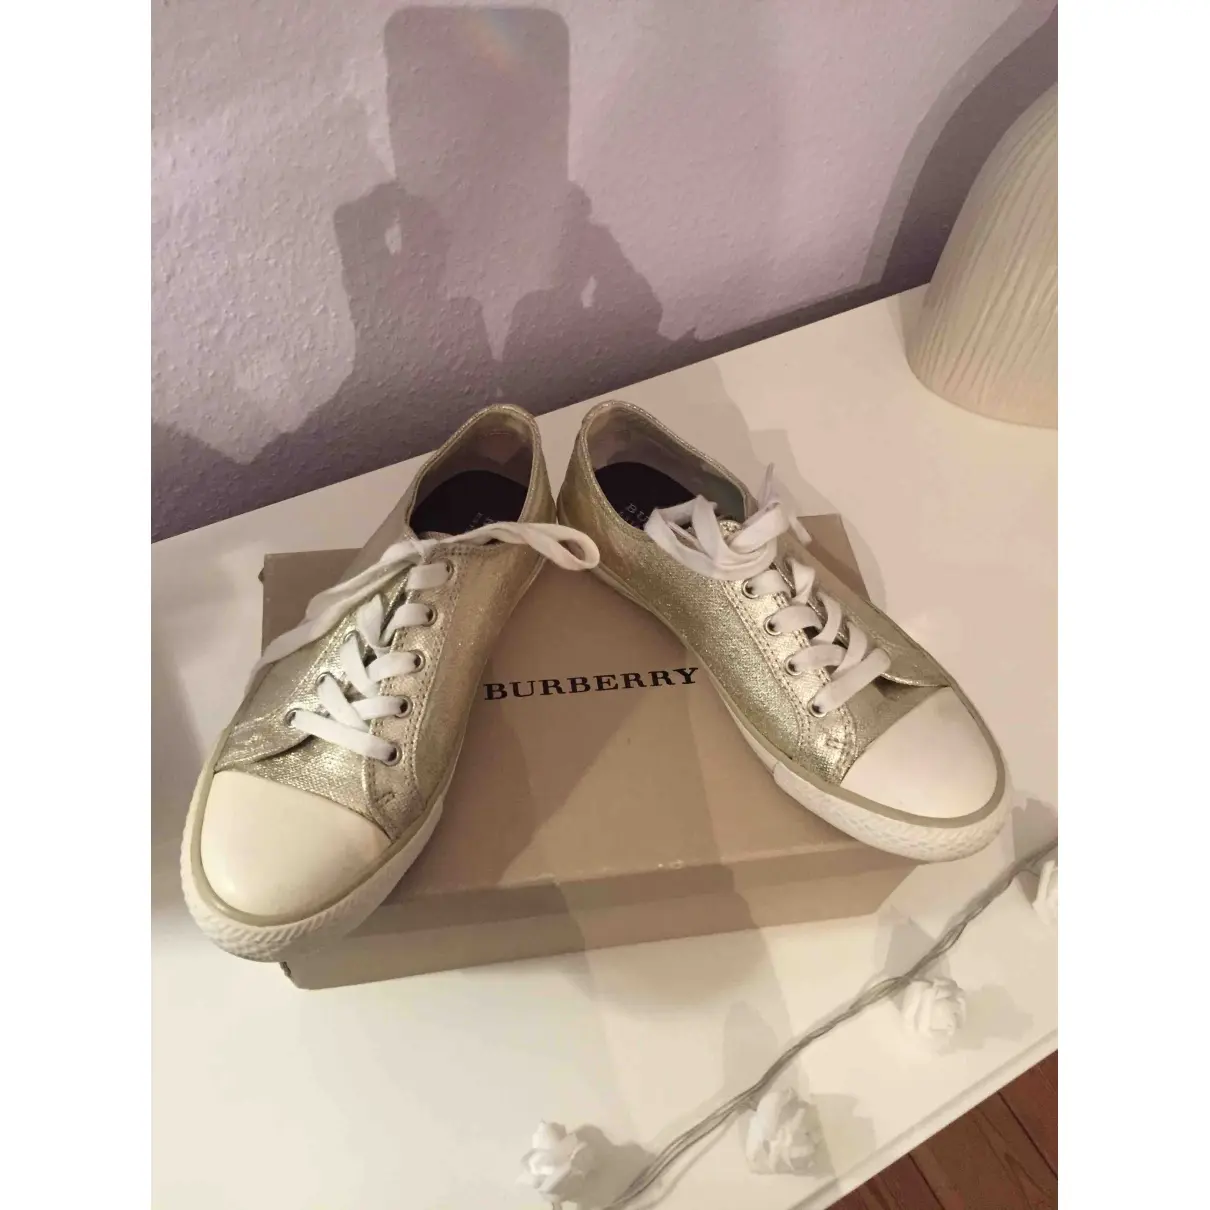 Burberry Glitter trainers for sale